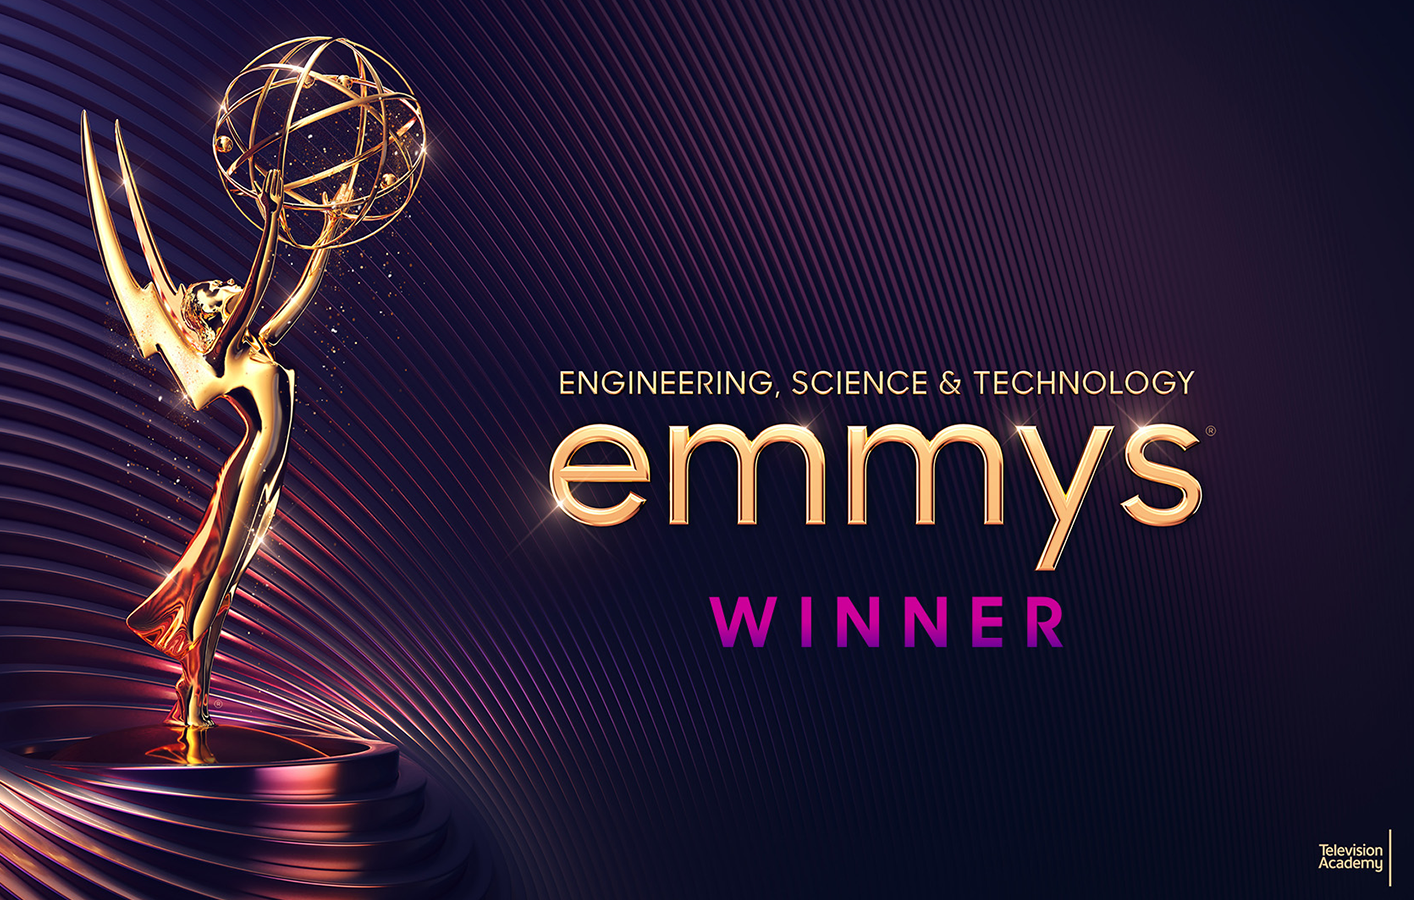 disguise wins an Emmy Award for our extended reality solution